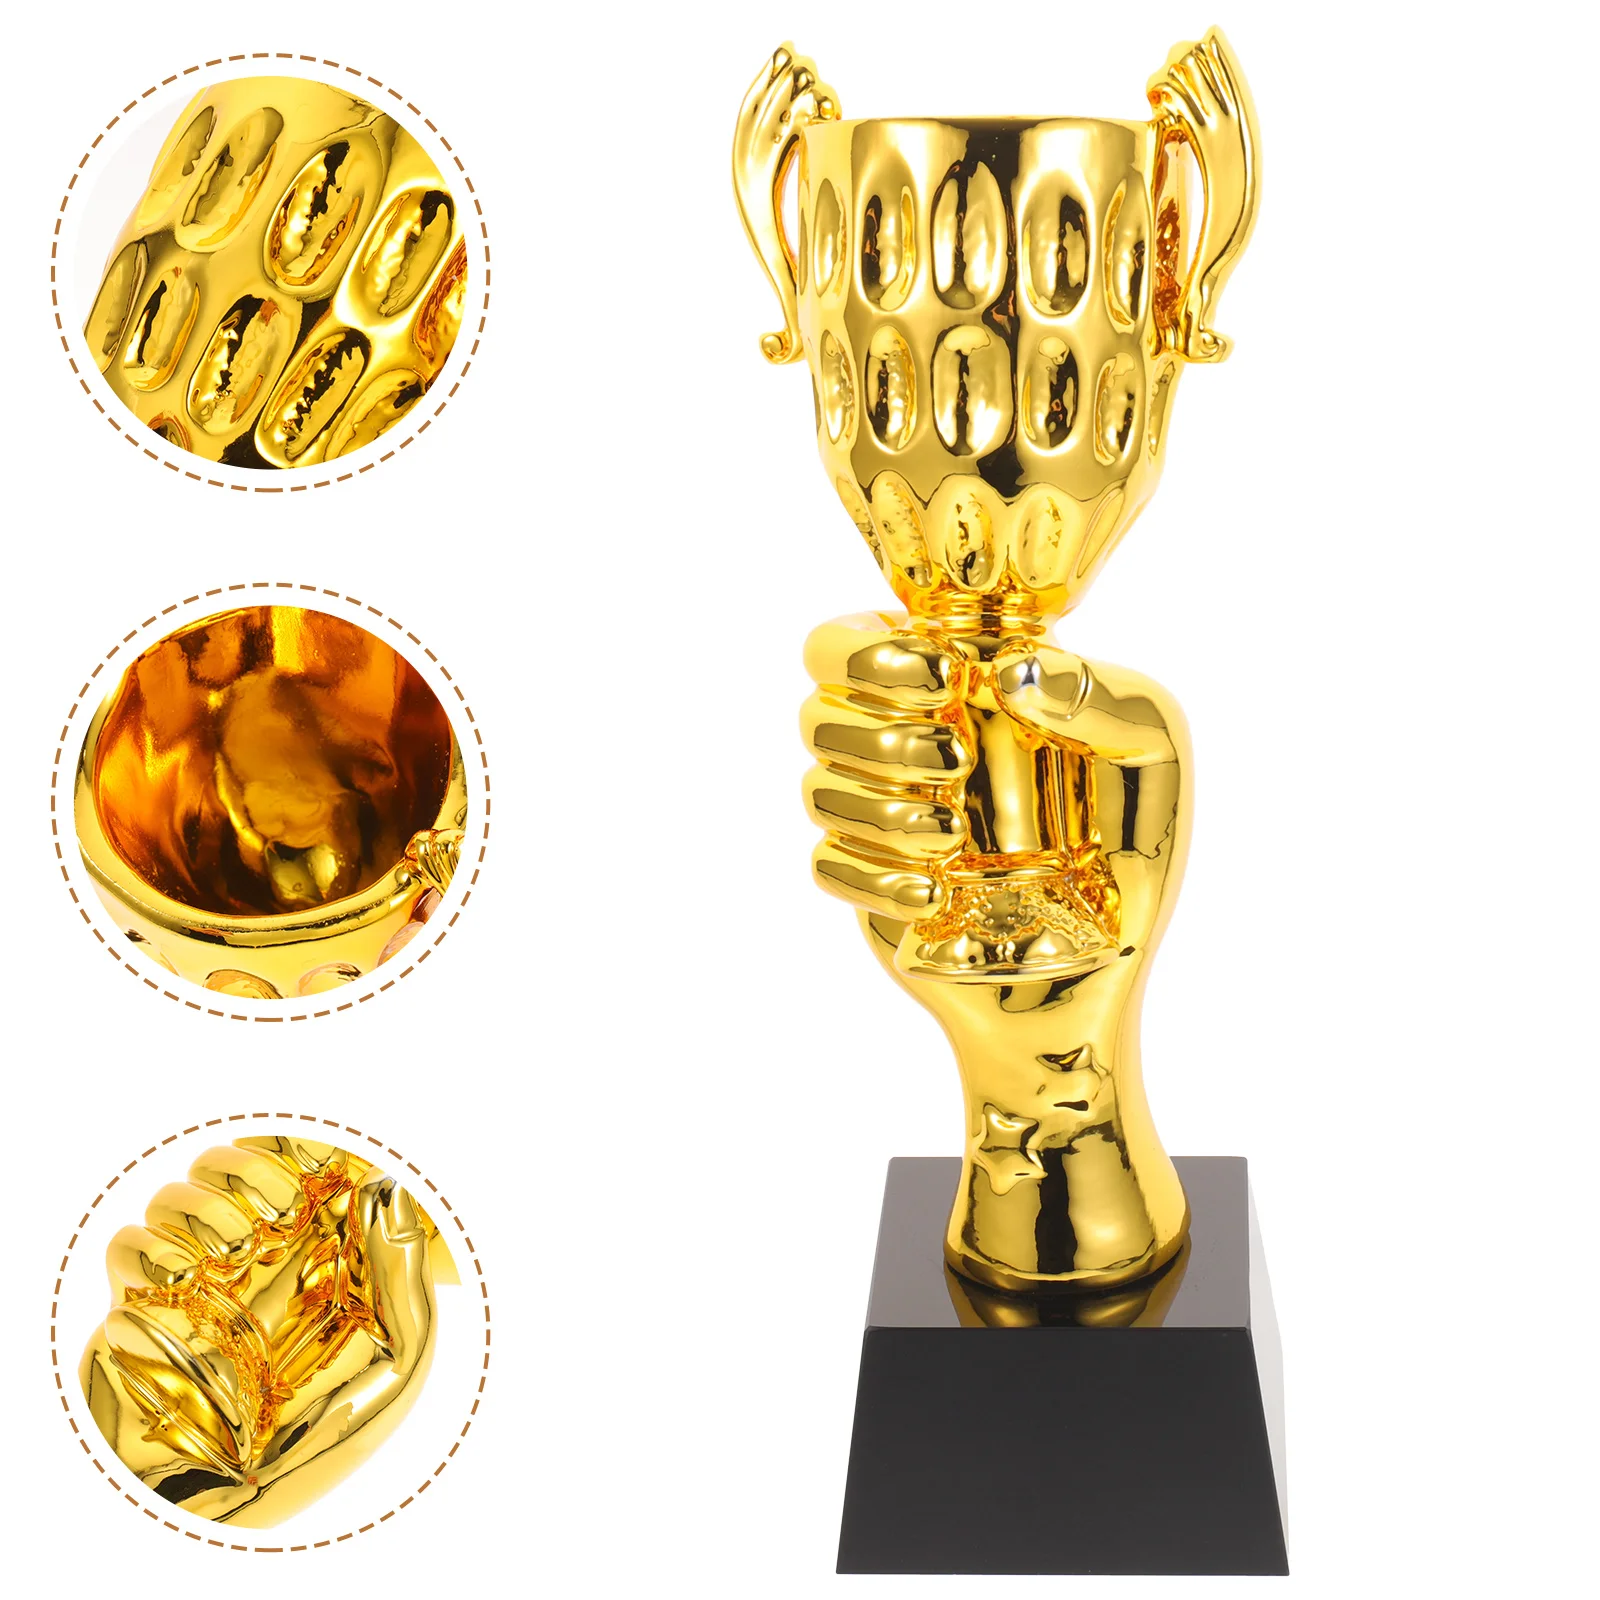 

Trophies Trophy Kids Award Prize Winning Prizes Events Rewards Cup Party Classroom Winner Awards Props School Gold Favors Toy